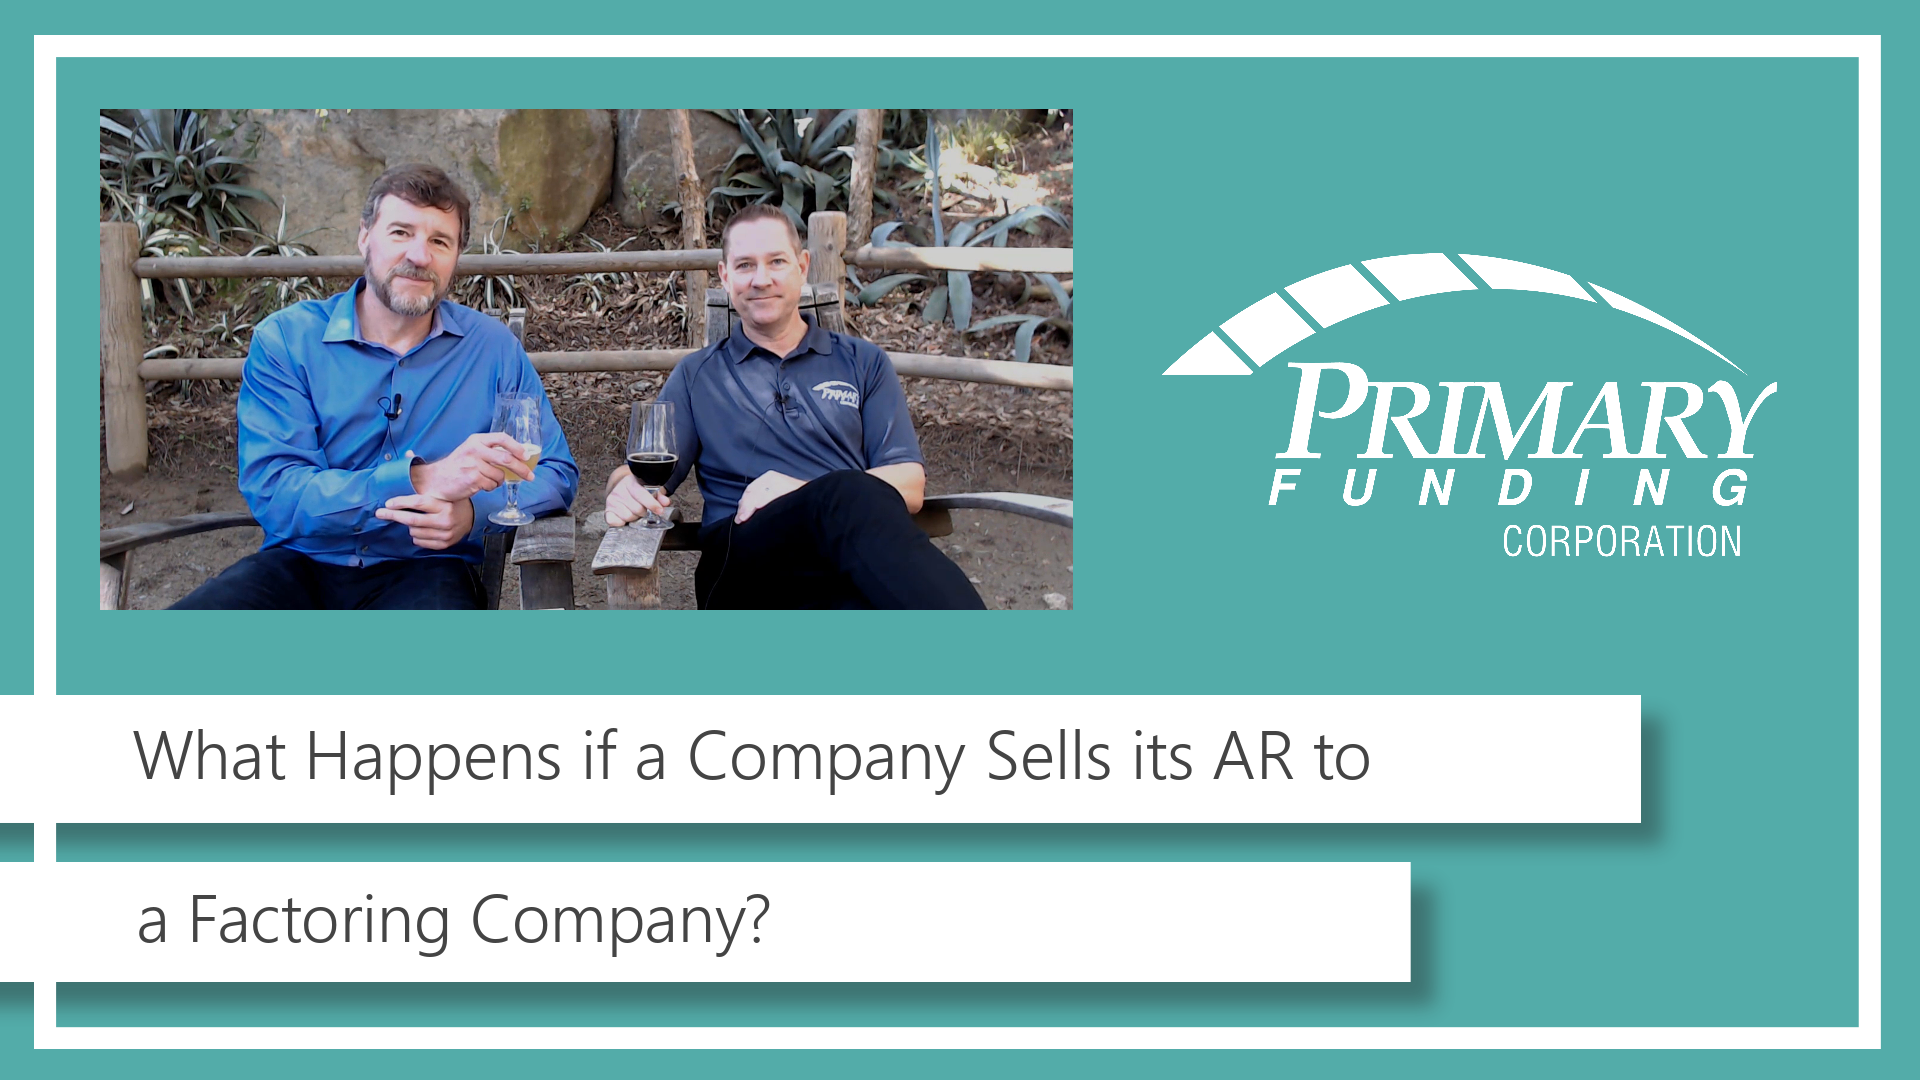 What Happens if a Company Sells its Accounts Receivables (AR) to a Factoring Company? post image